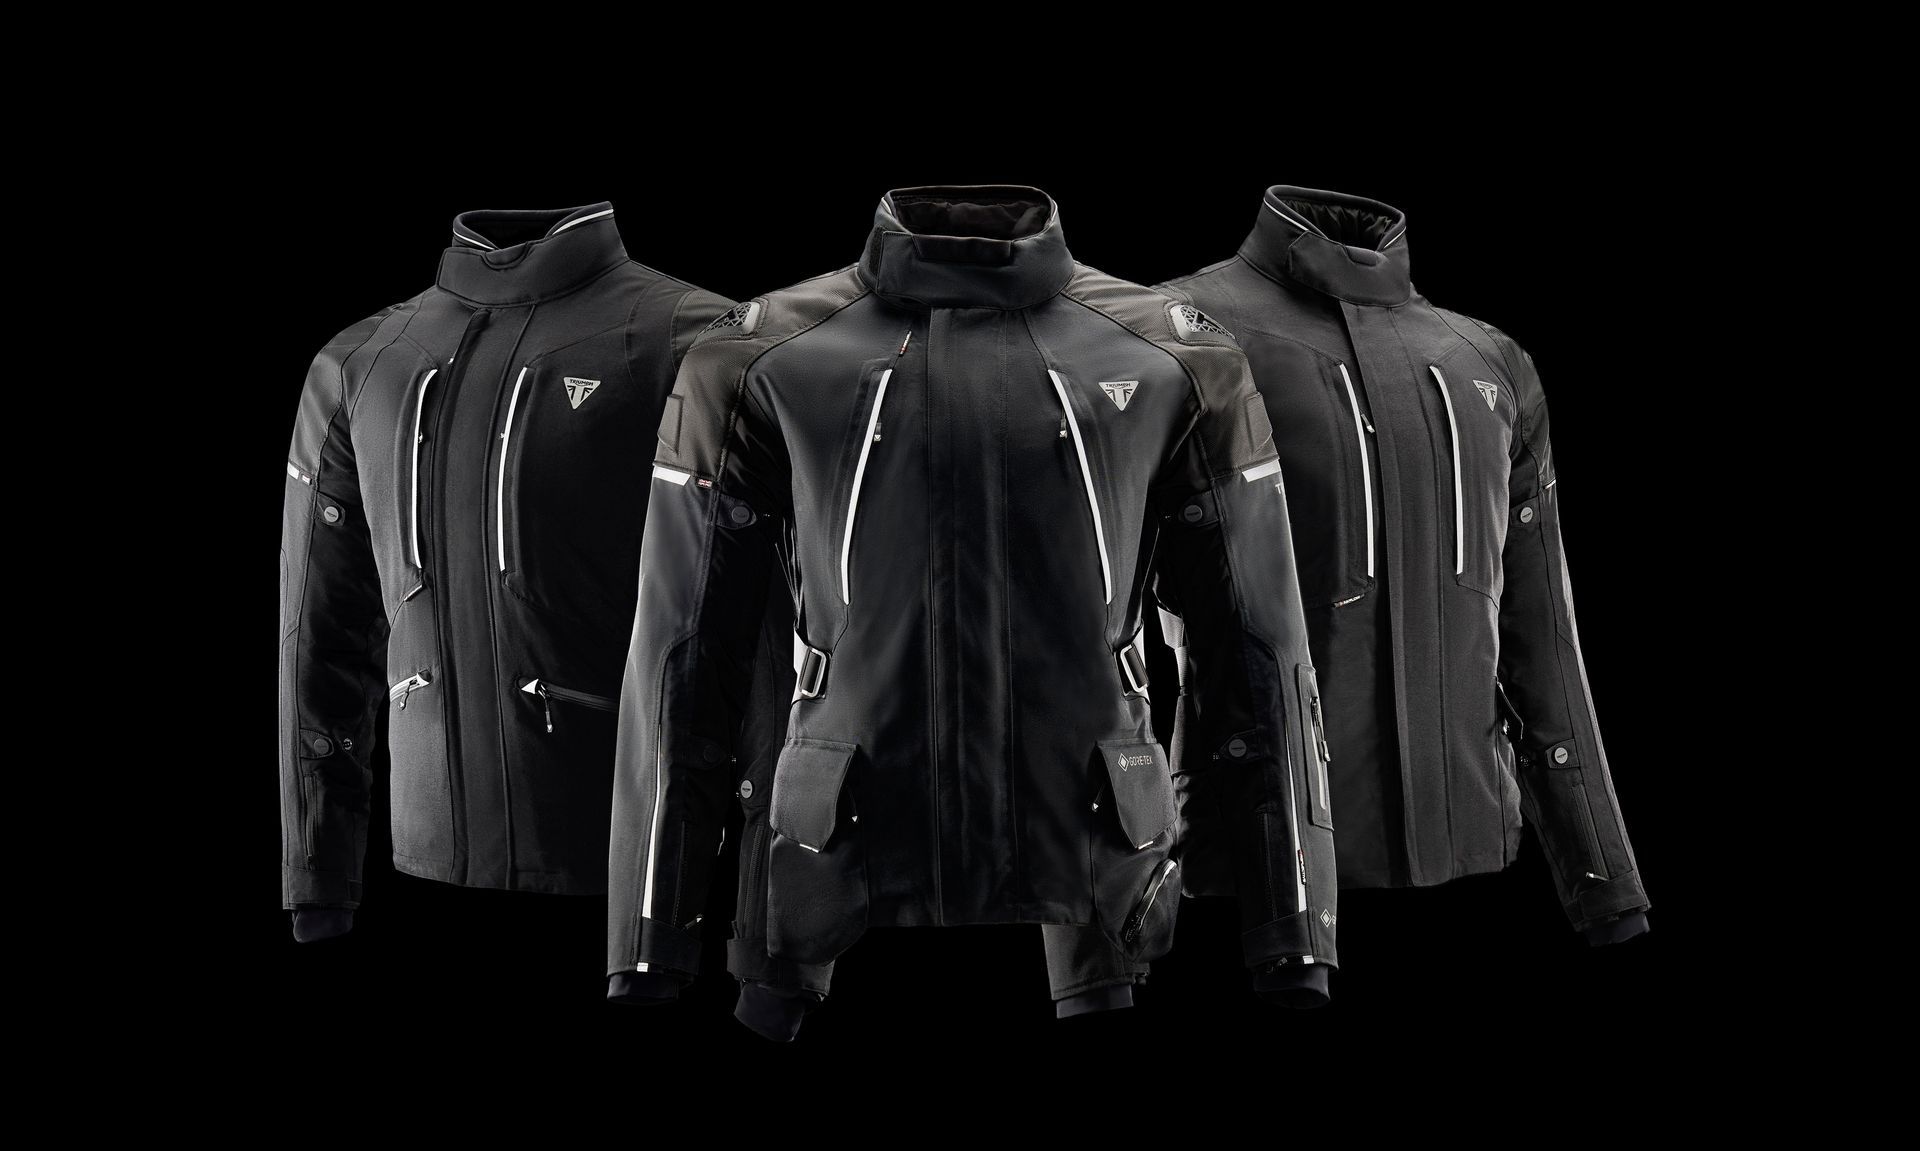 three black jackets are sitting next to each other on a black background .